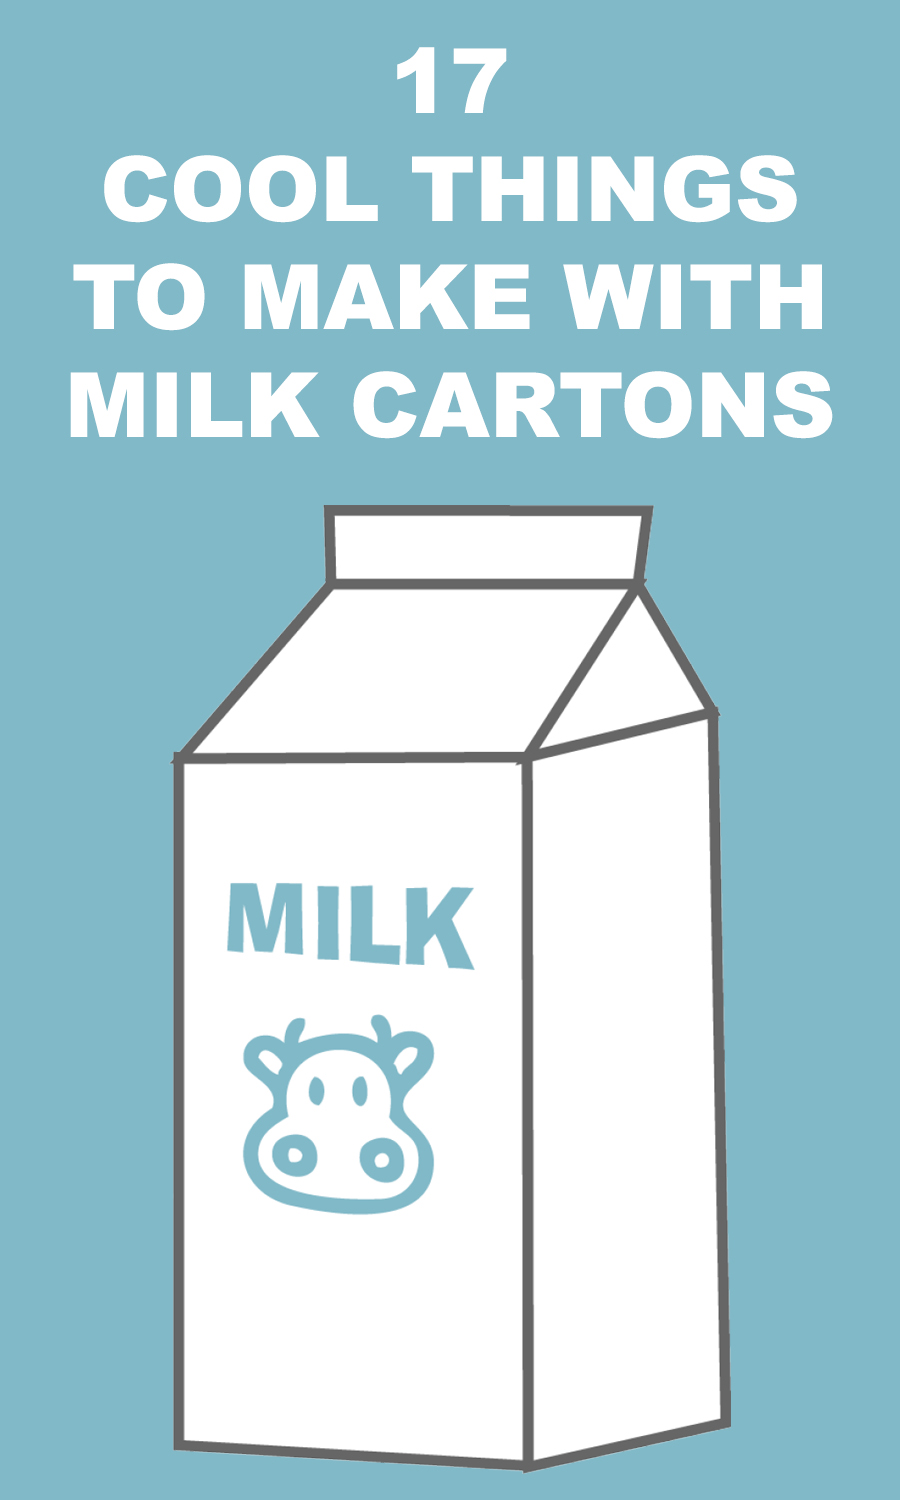 17 Cool Things to Make with Milk Cartons